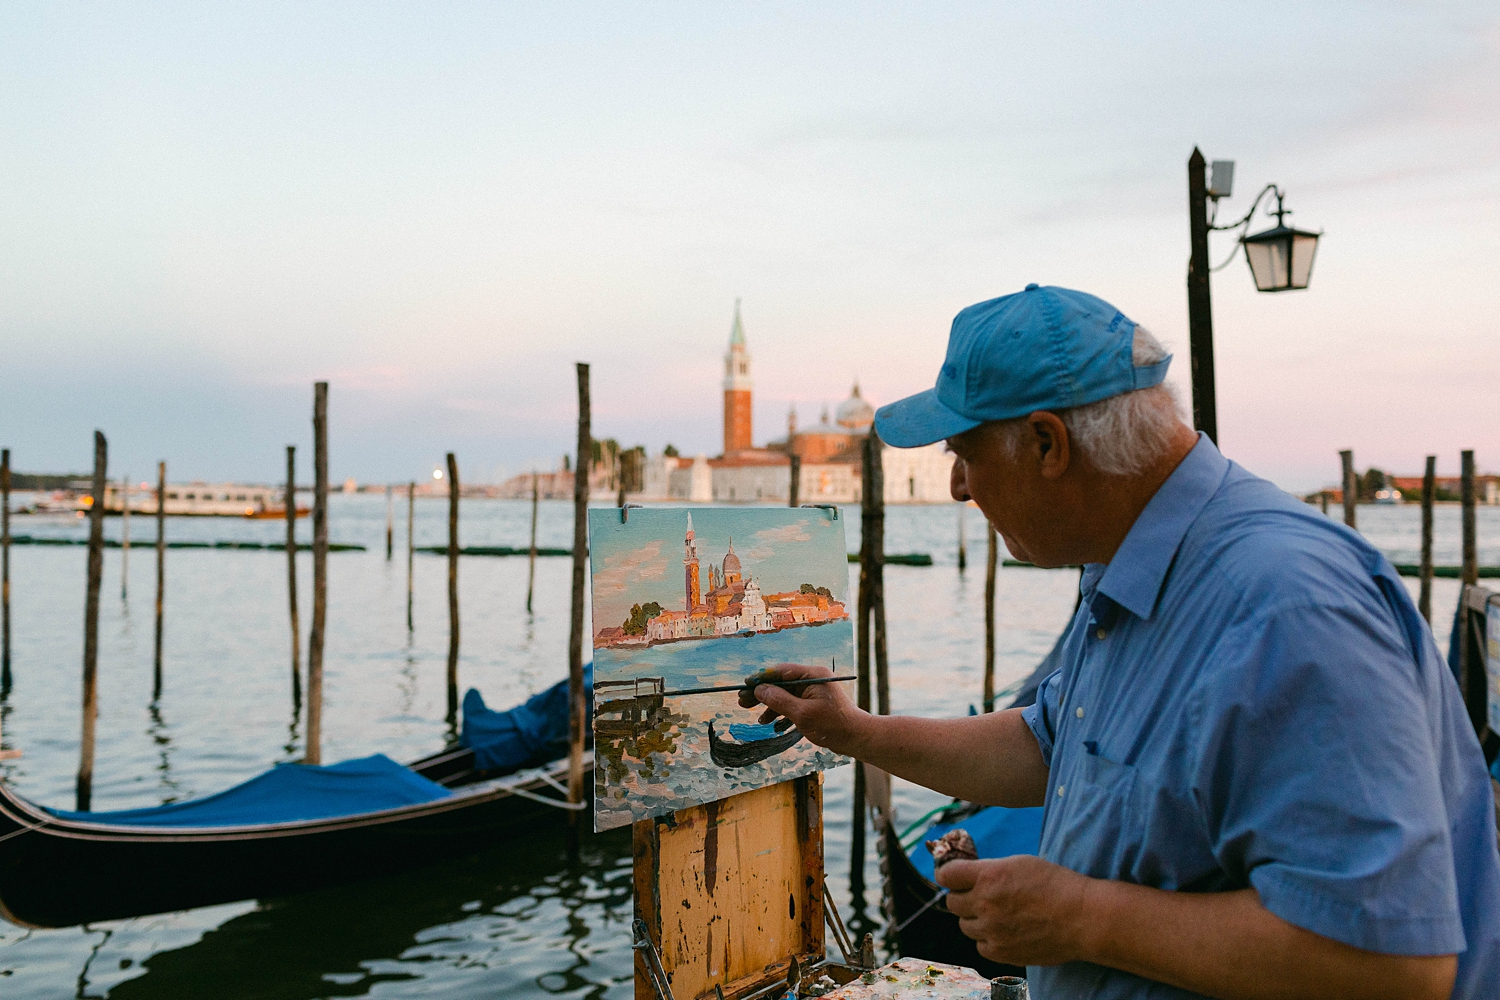 man painting image of Grand canal in Venice church tower and blue gondolas against sunset